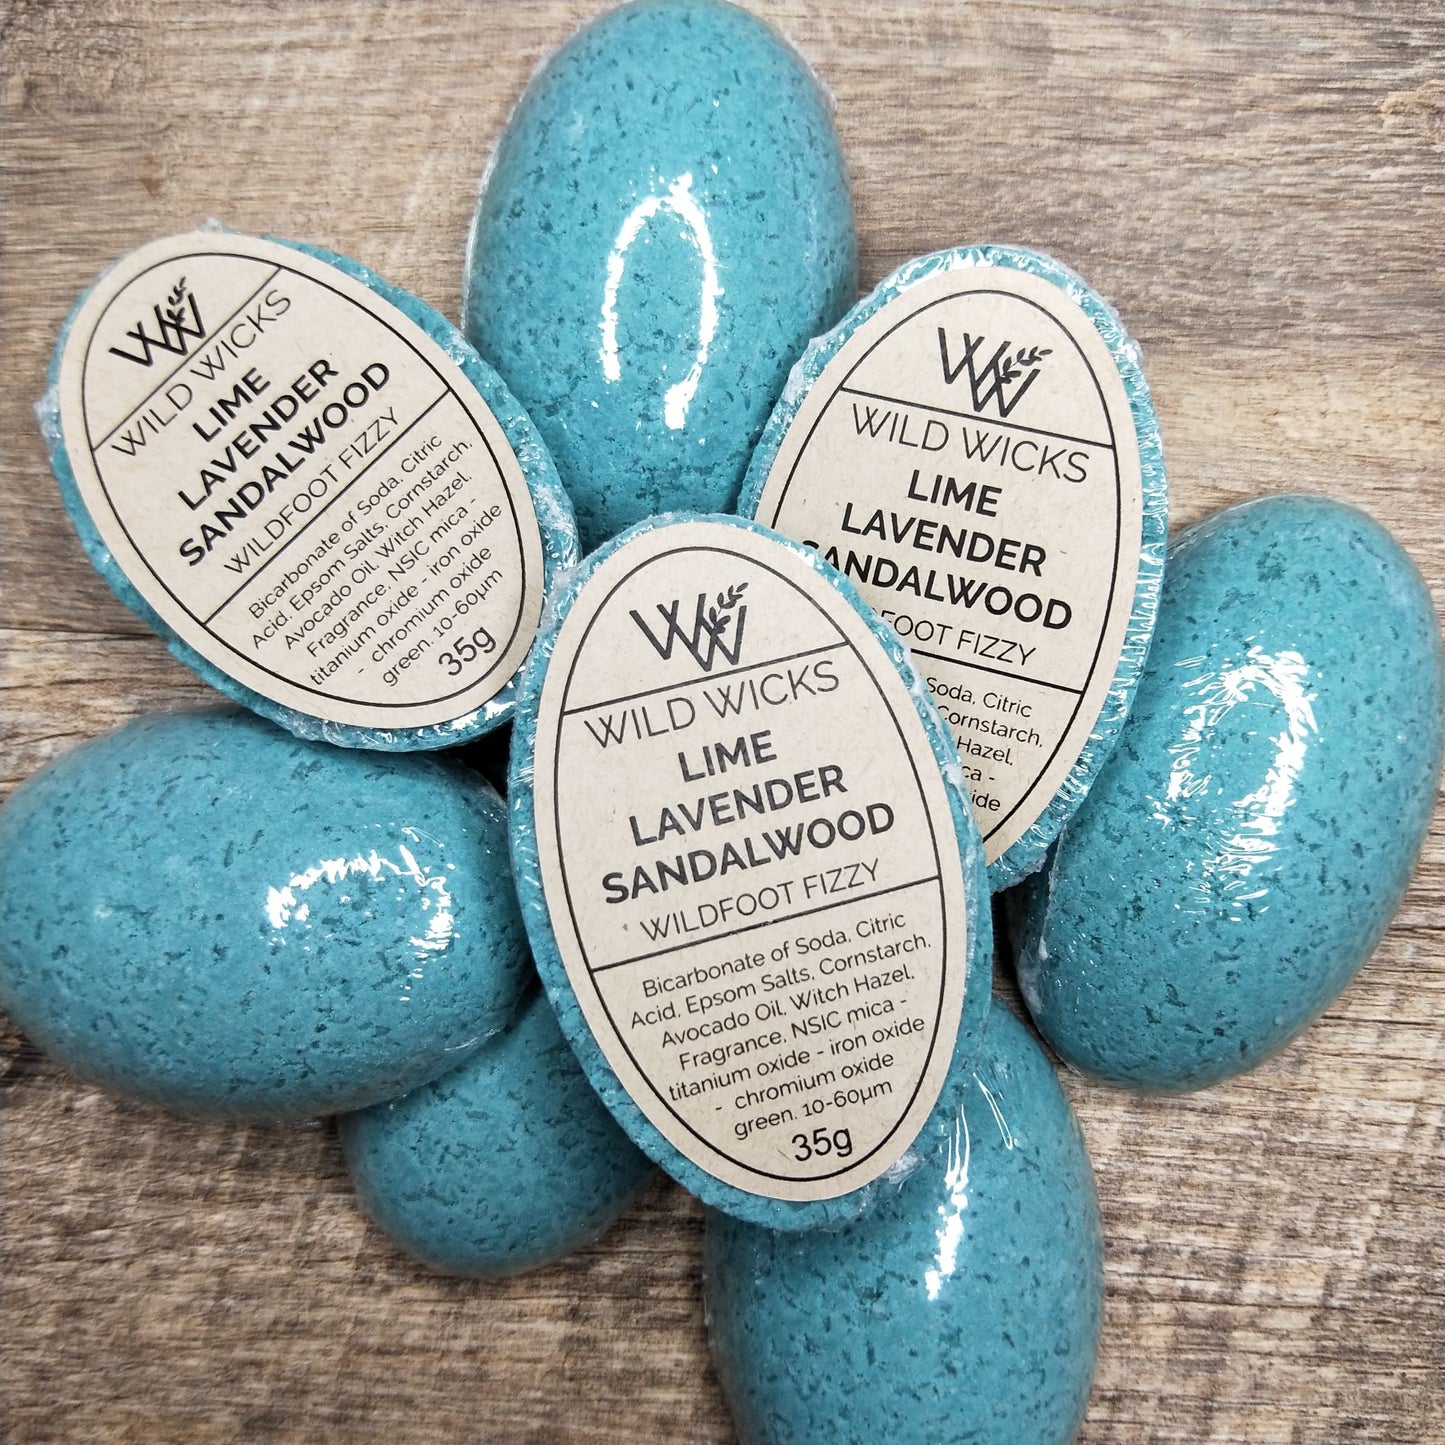 Wildfoot Fizzy Lime - Lavender - Sandalwood